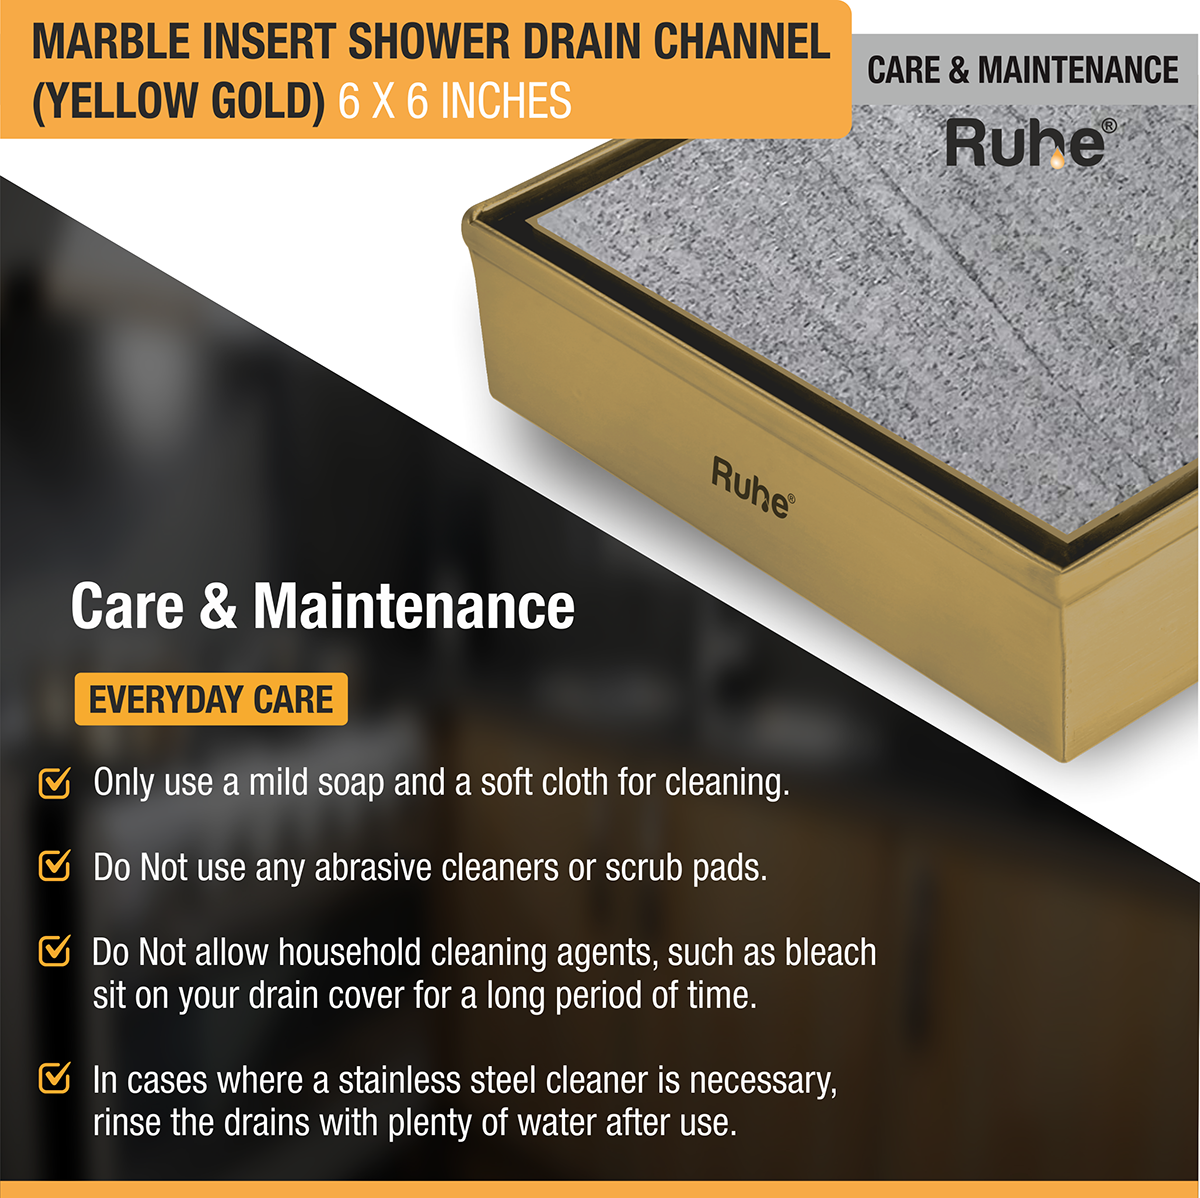 Marble Insert Shower Drain Channel (6 x 6 Inches) YELLOW GOLD PVD Coated care and maintenance